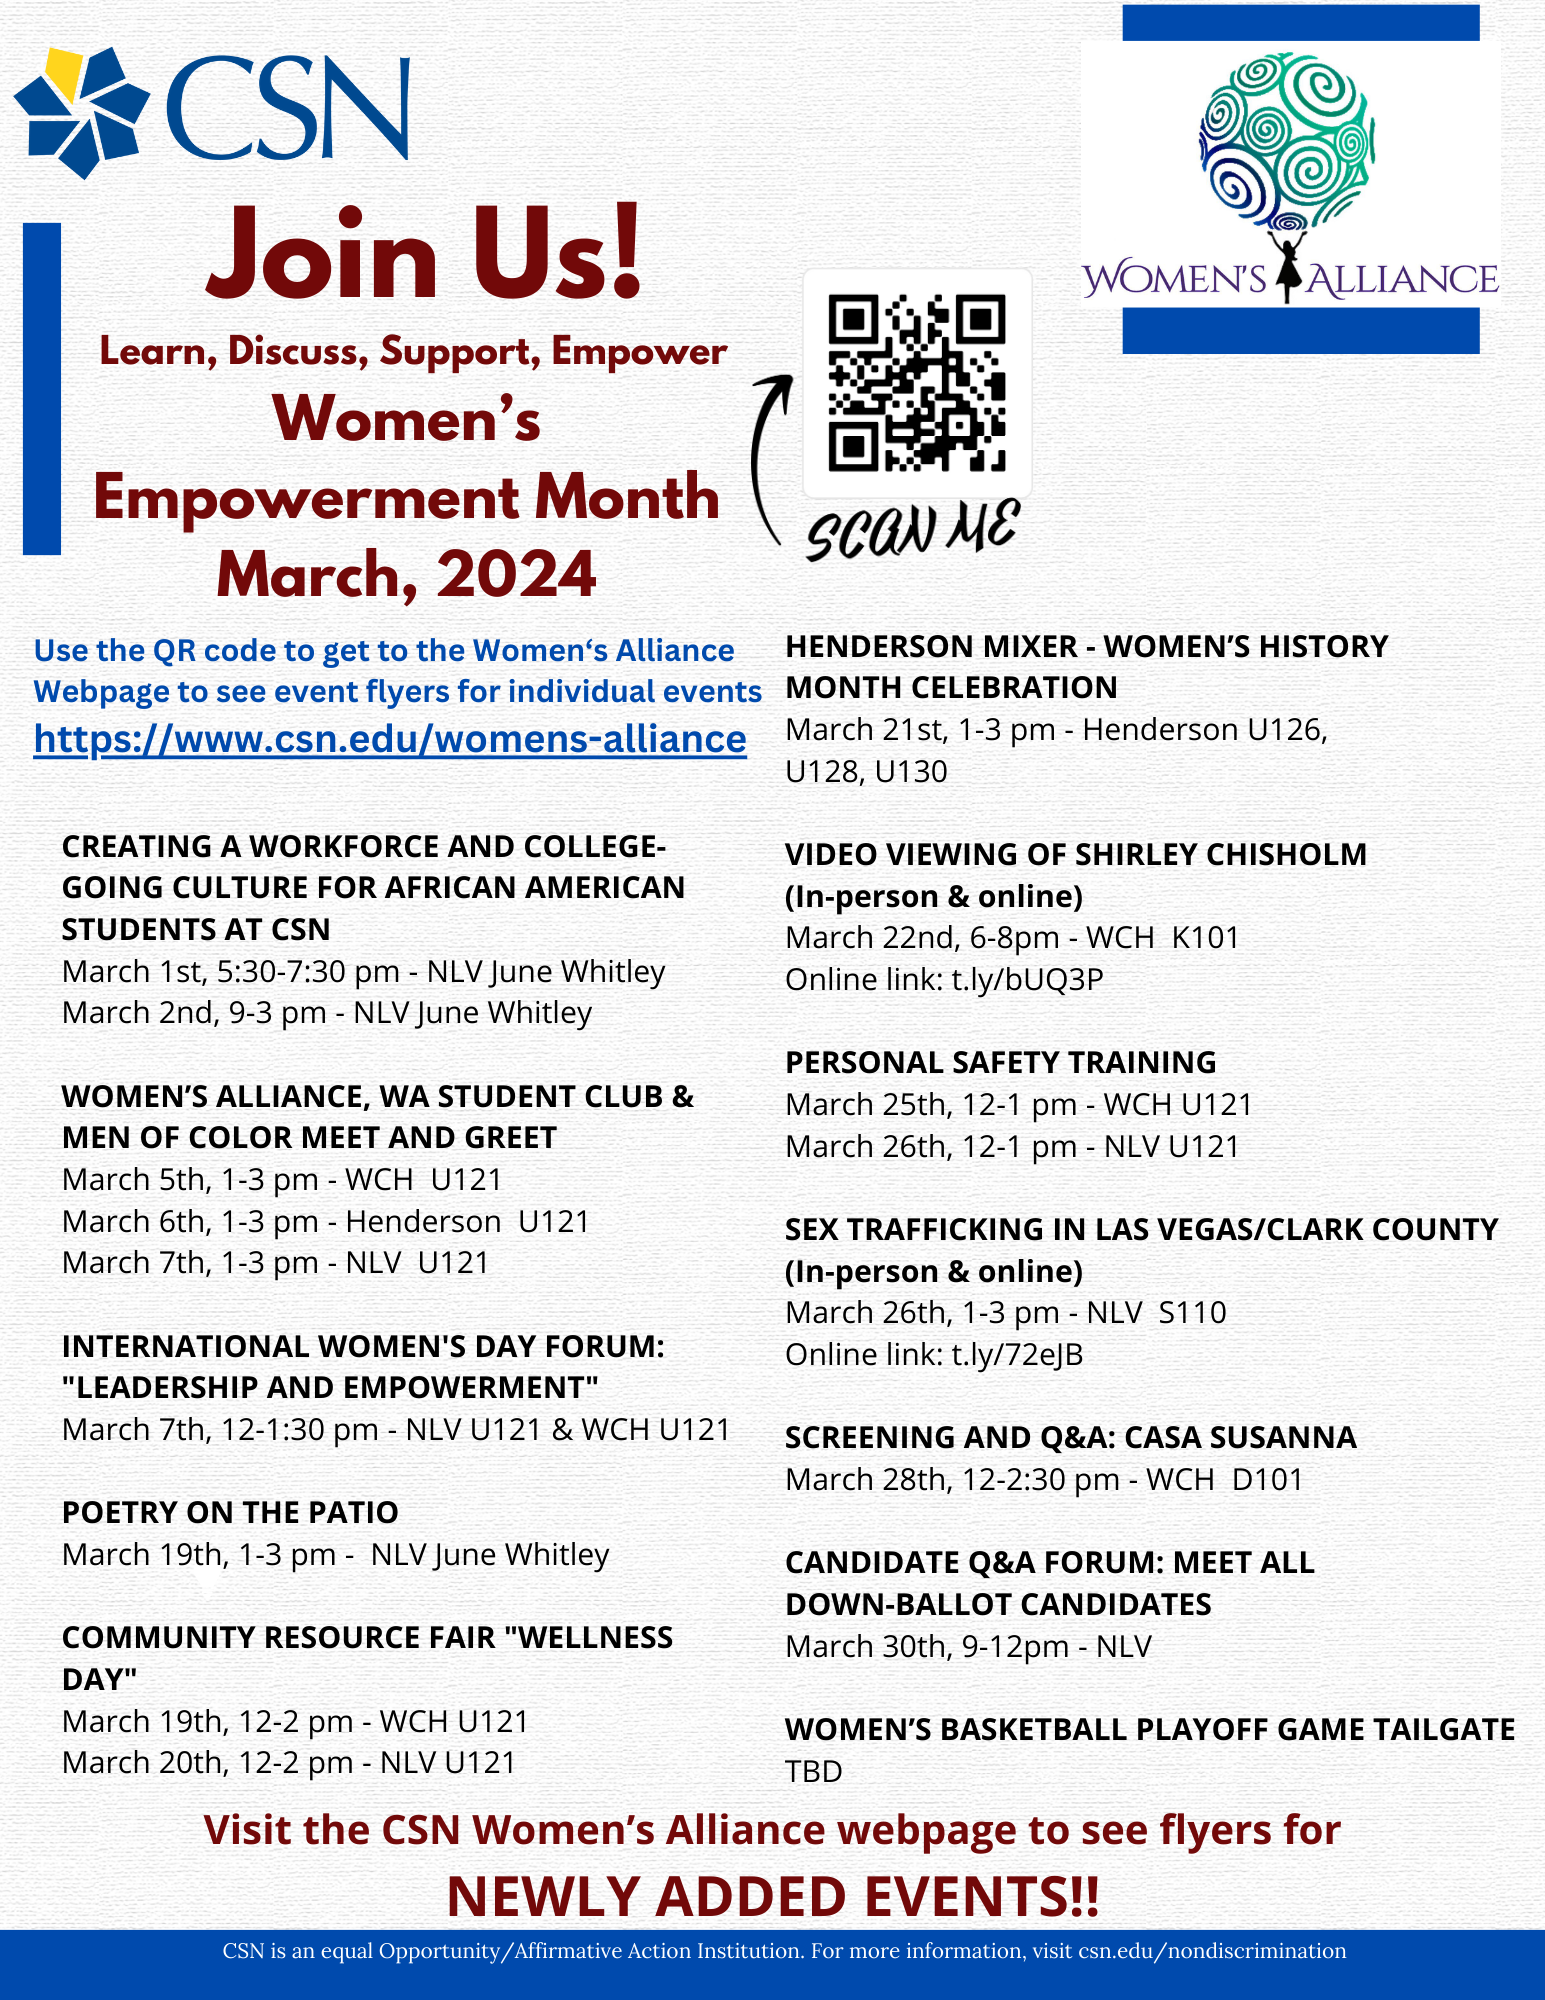 Women's Empowerment Month Events